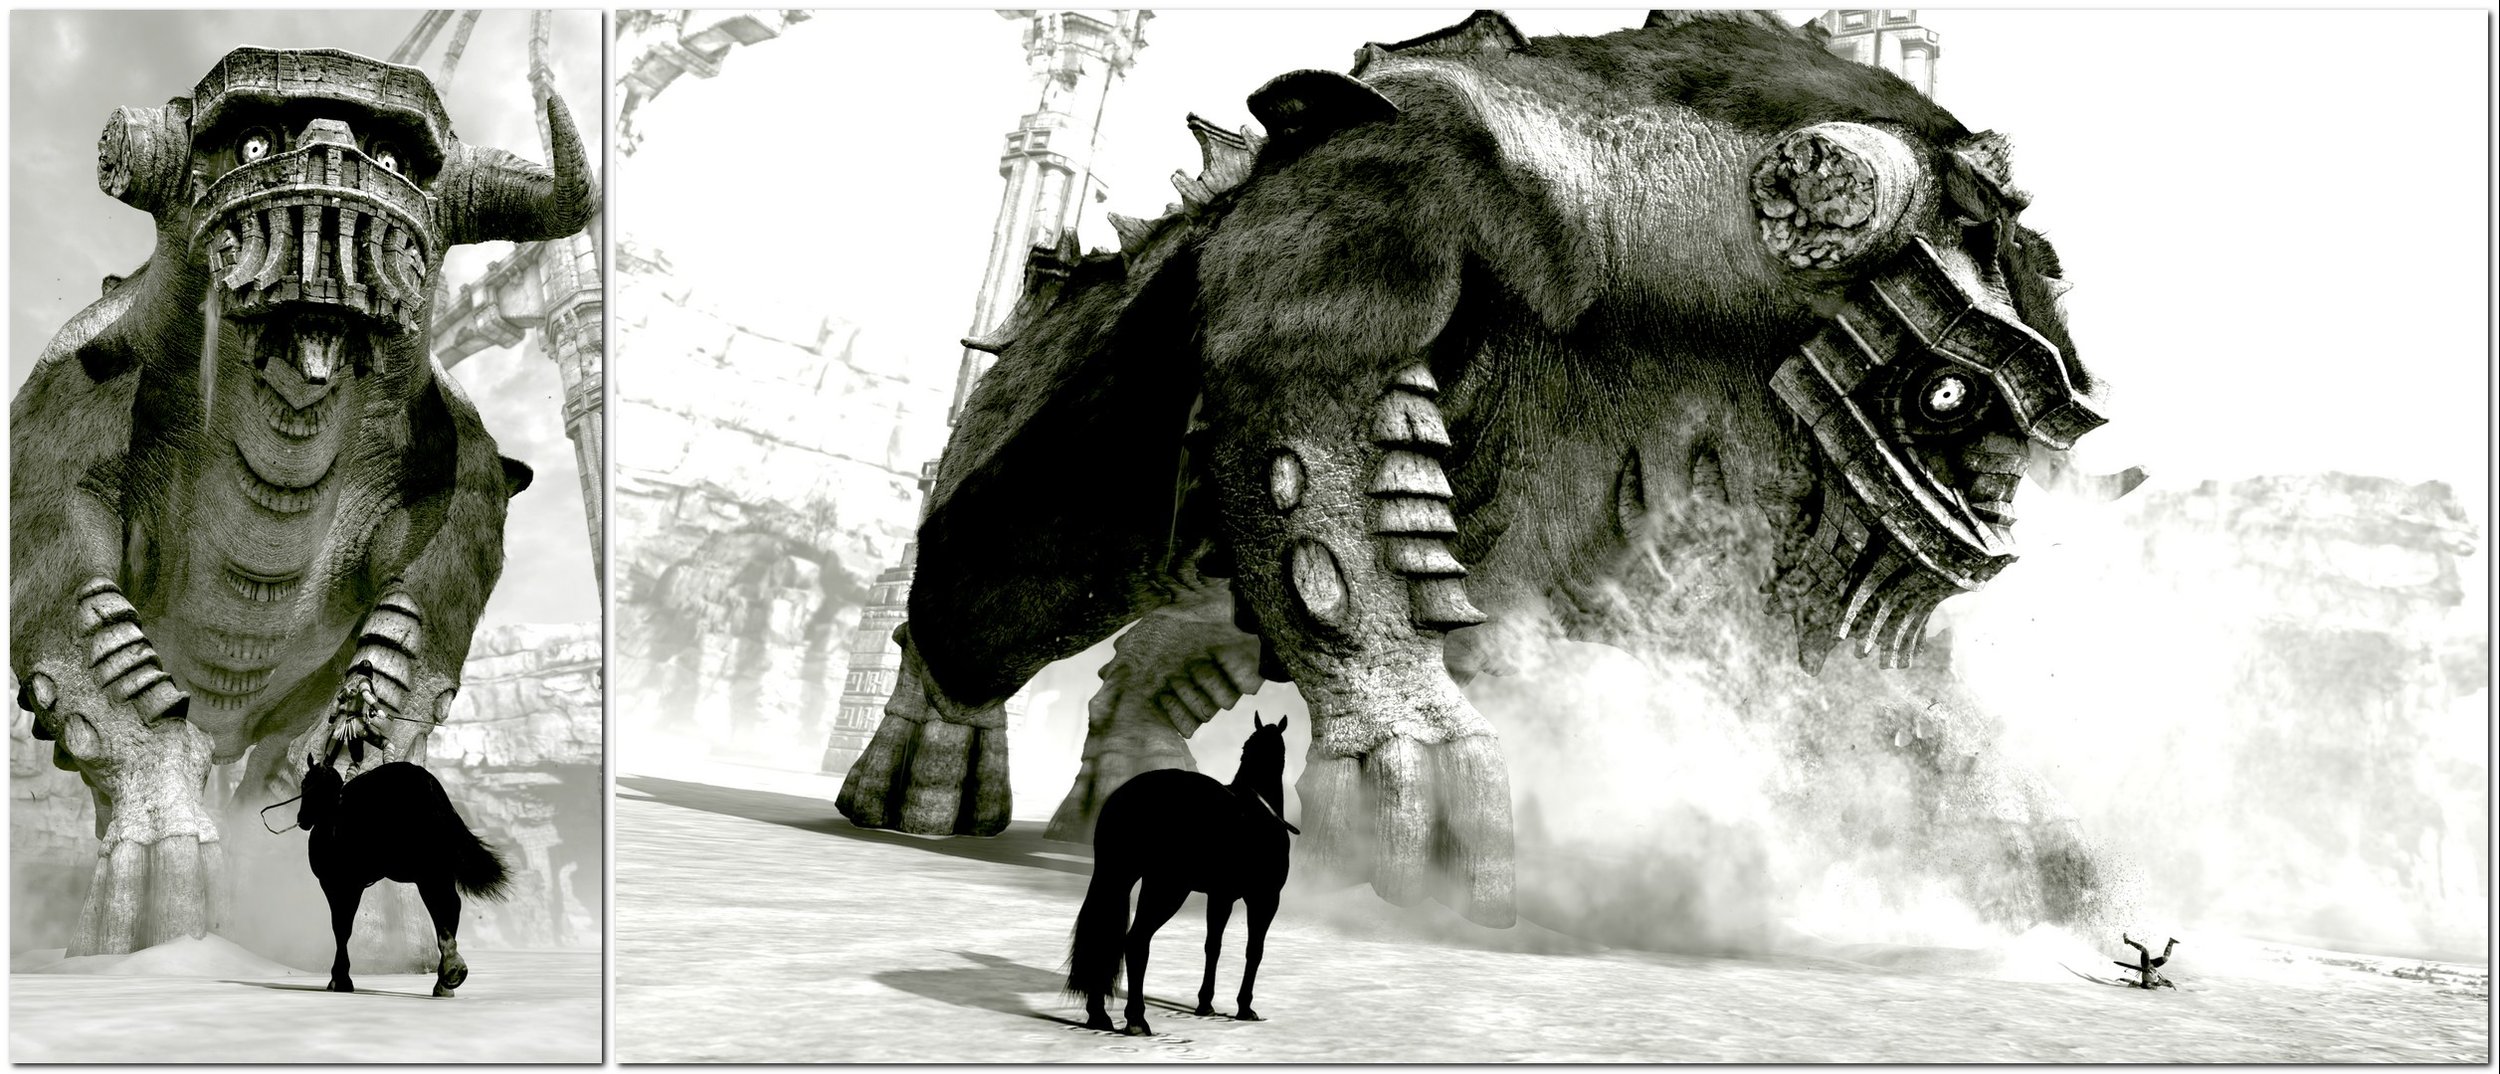 Shadow of the Colossus Photo Mode is Absolutely Stunning - MonsterVine